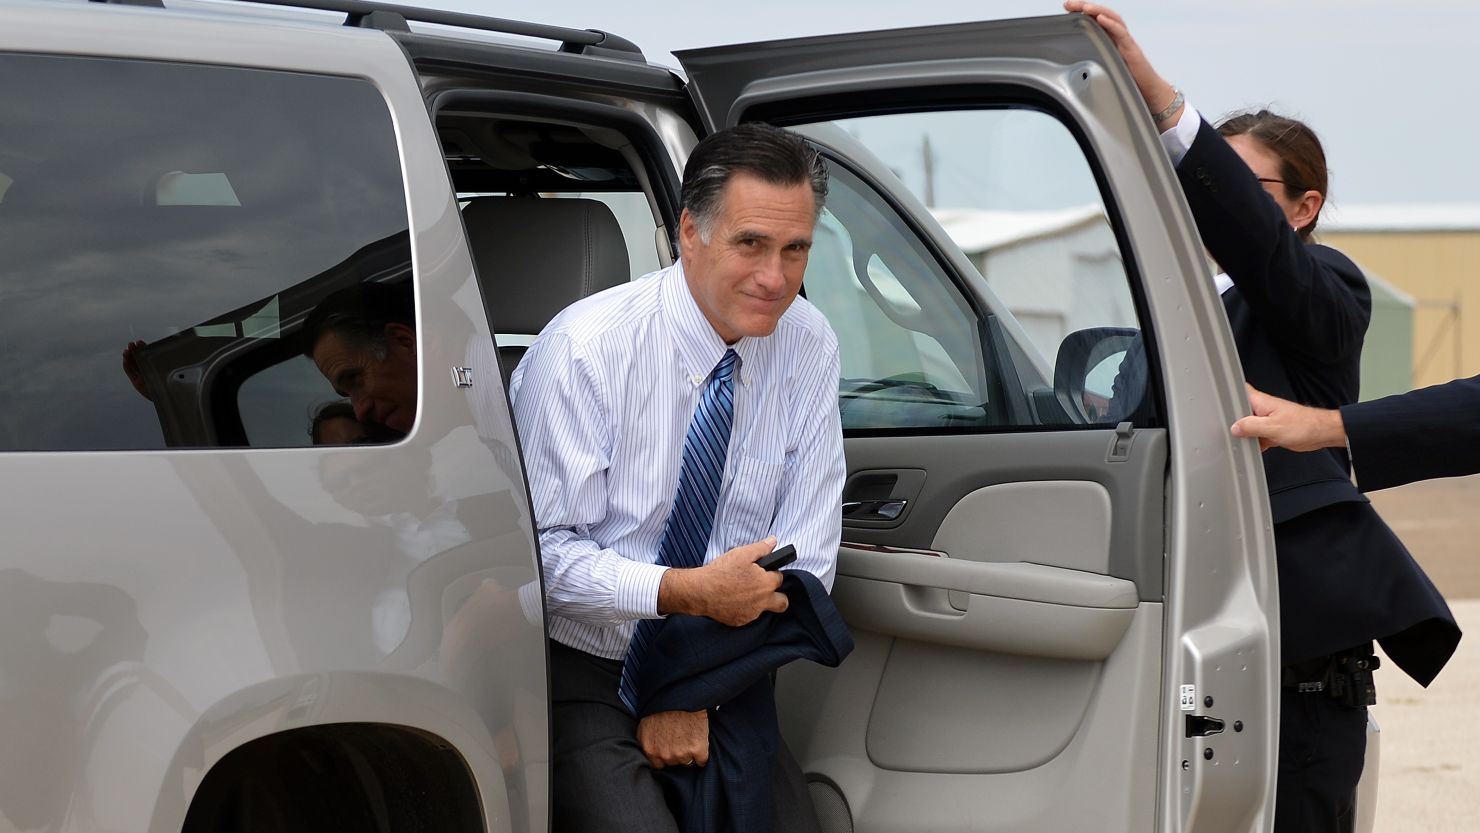 US Republican presidential candidate Mitt Romney arrives to board his campaign plane at Lea County Regional Airport in Hobbs, New Mexico, on August 23, 2012. Romney is in New Mexico to unveil his energy plan, which aims at energy independence for North America by 2020. AFP PHOTO/Jewel Samad (Photo credit should read JEWEL SAMAD/AFP/GettyImages) 